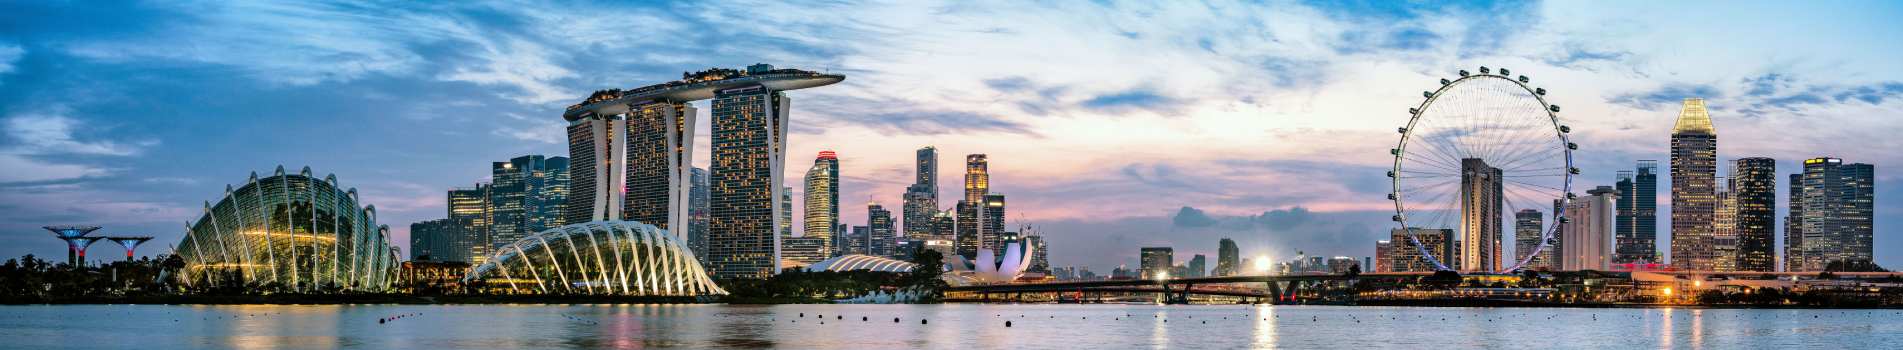 Bribery Scandal Rocks Singapore: Keppel’s Non-Compliance with ISO 37001 Raises Eyebrows